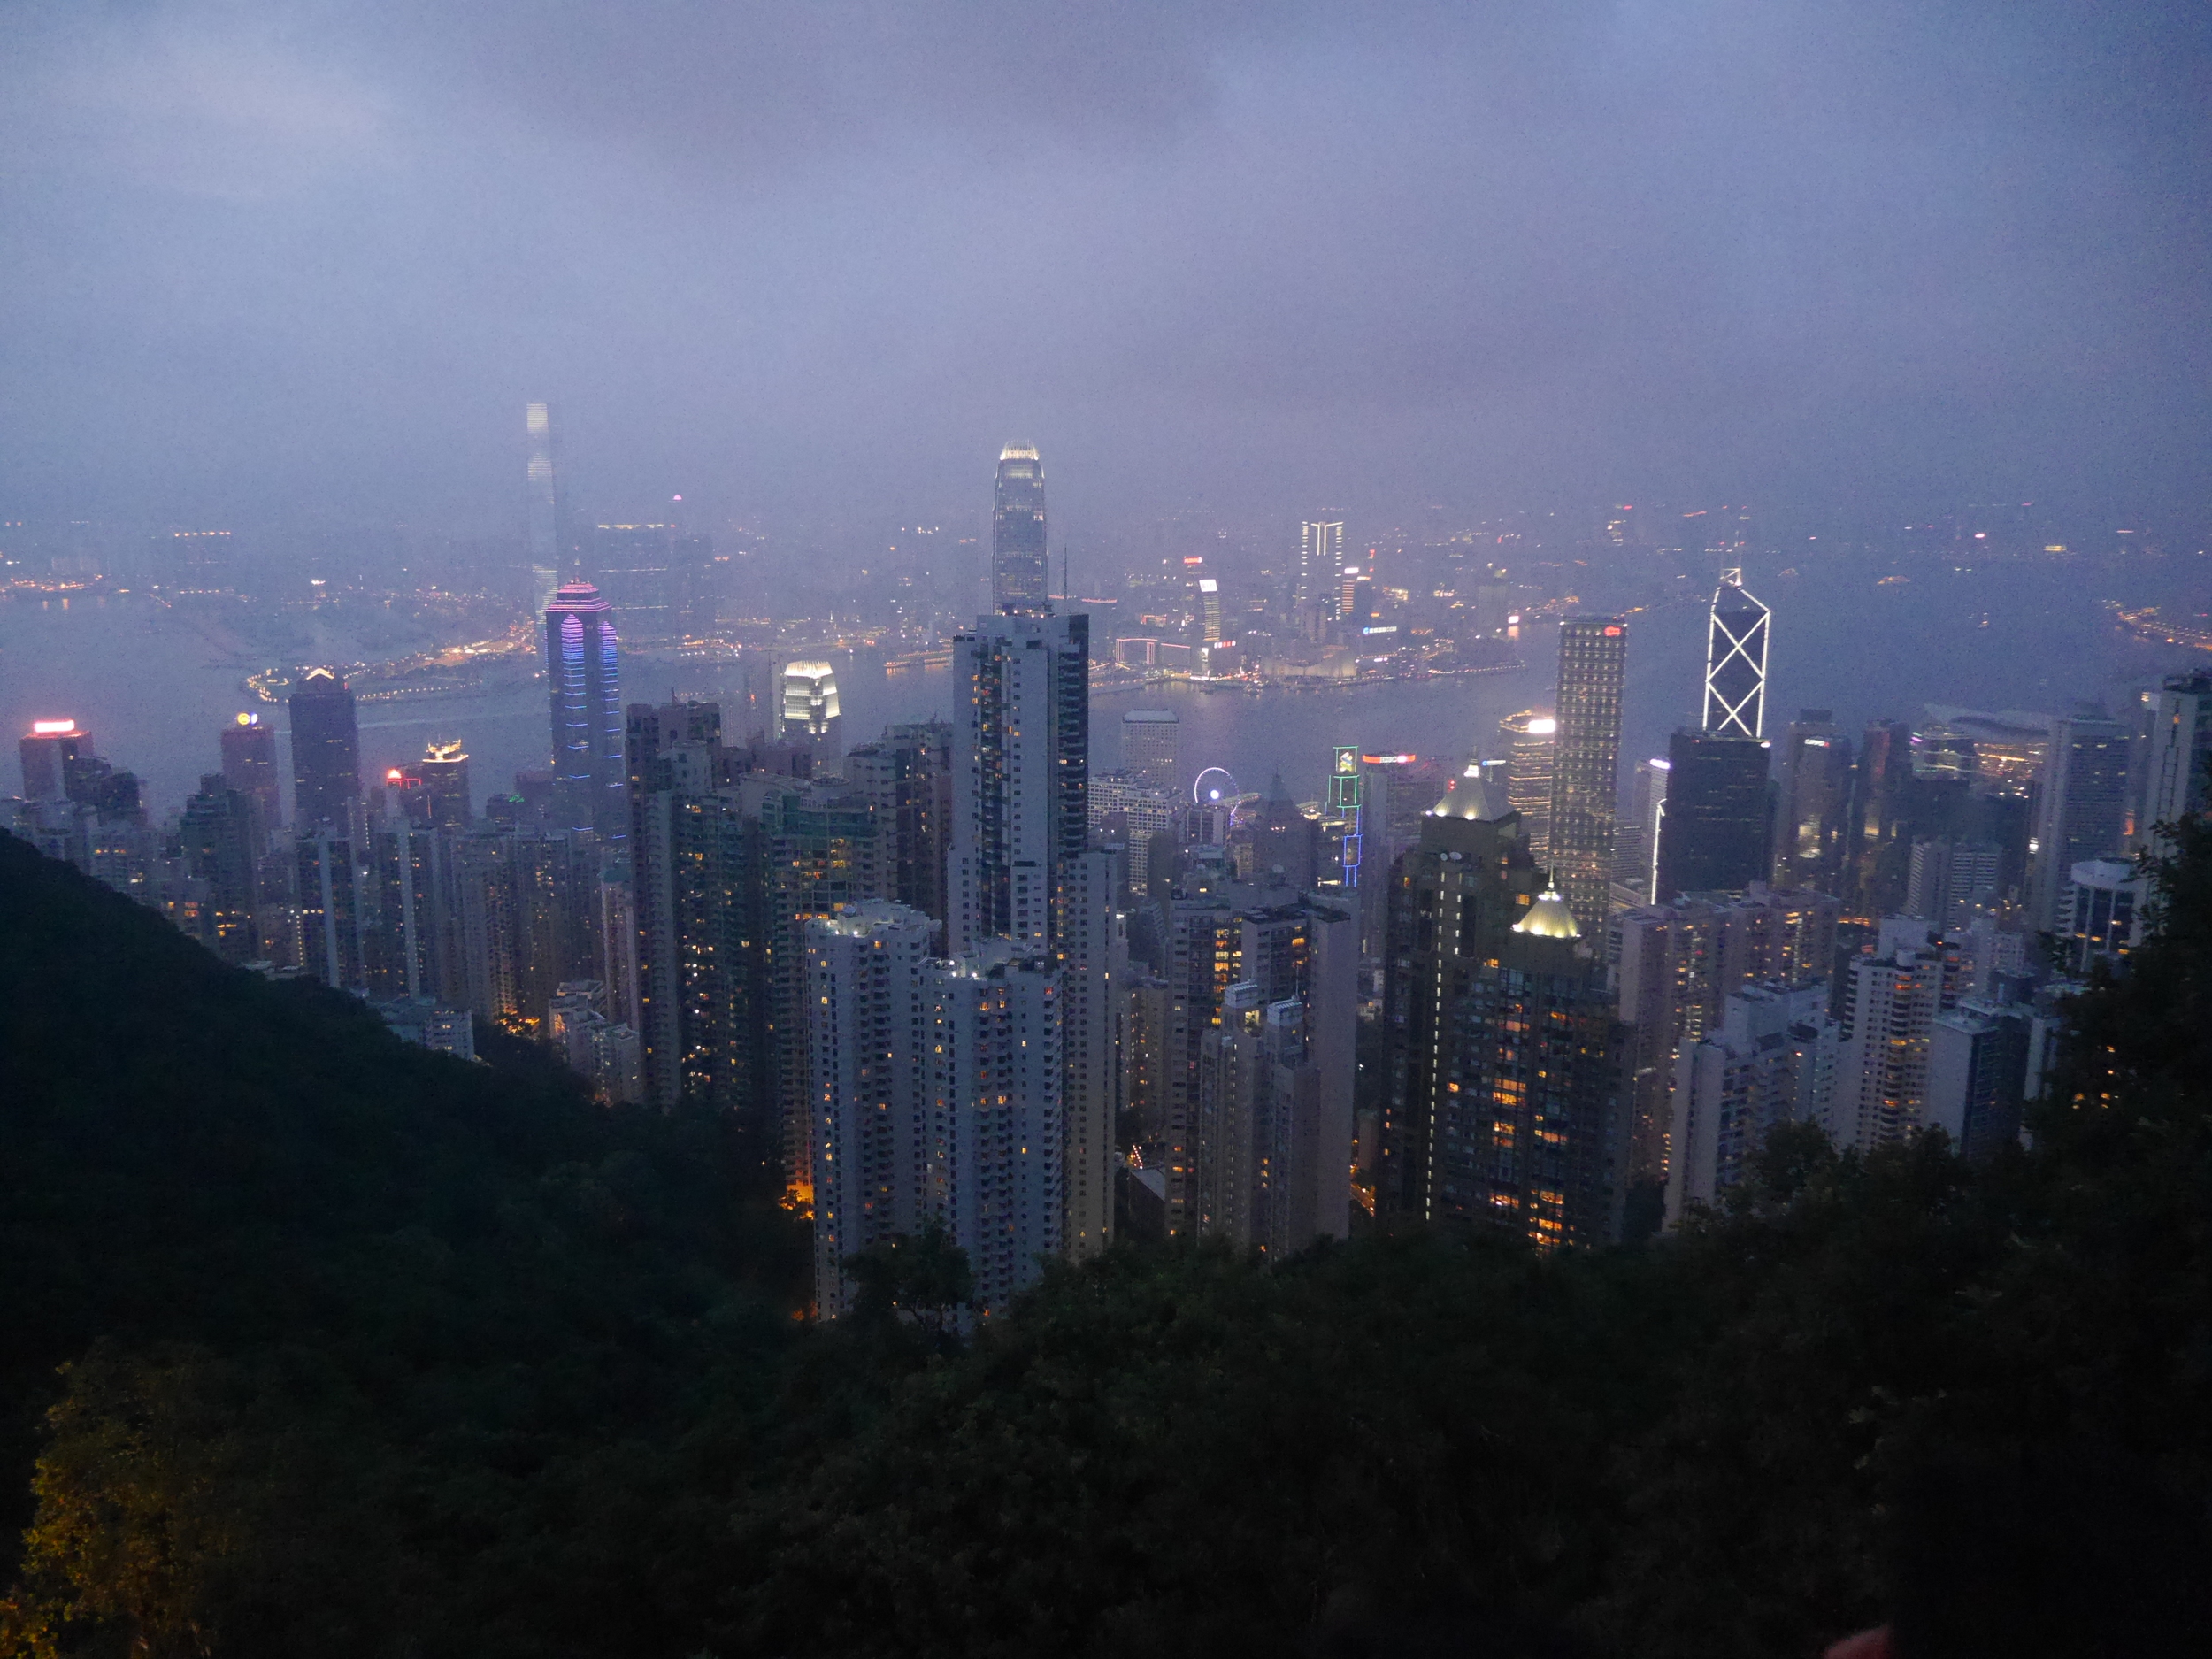  The Hong Kong skyline at night. Hong Kong Island in the foreground, Kowloon in the background. 